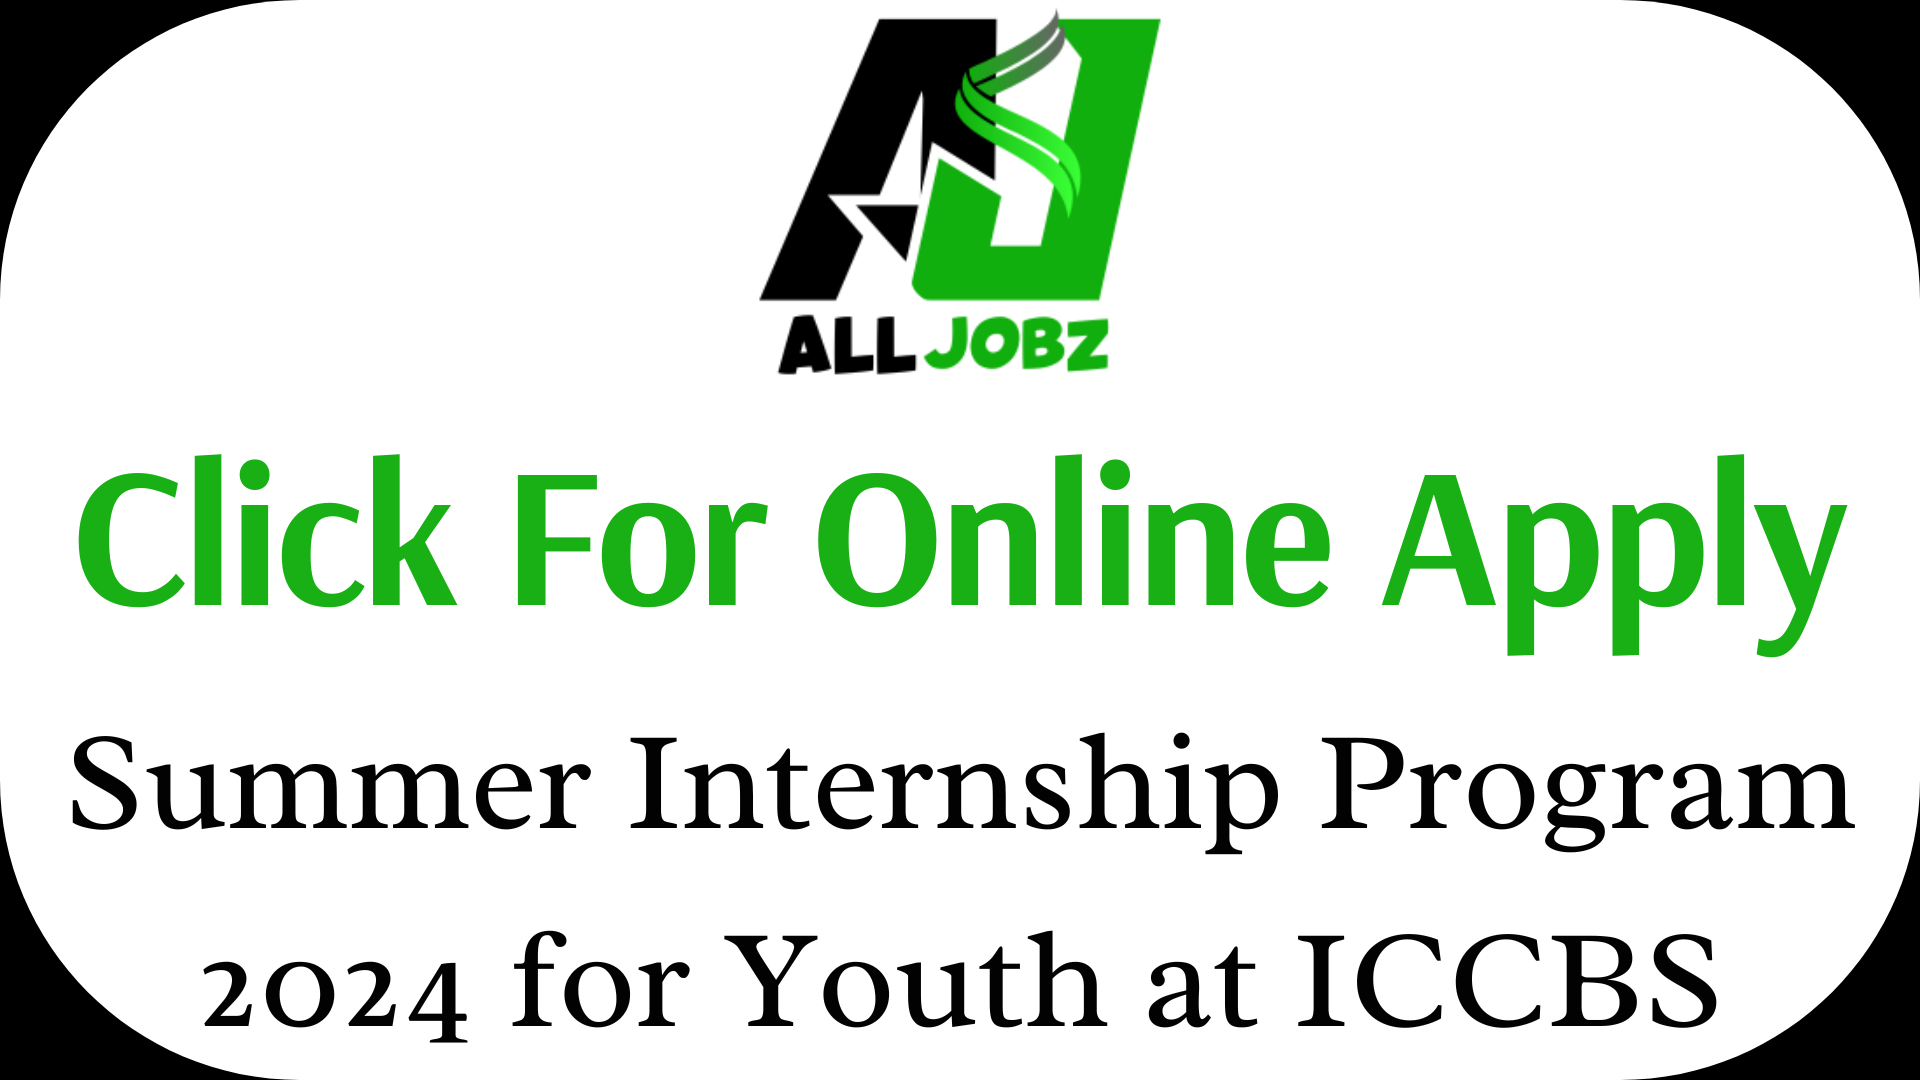 Summer Internship Program 2024 For Youth At Iccbs, Iccbs Internship 2024, Iccbs Internship 2024 Application Form, Iccbs Internship 2024 Last Date, Iccbs Internship Test Preparation, H.e.j. Internship 2024, Www.iccs.edu Application Form, Iccbs Jobs 2024, Iccbs Mphil Admission 2024, The International Center For Chemical And Biological Sciences (Iccbs) At The University Of Karachi Is Excited To Announce The Summer Internship Program For Youth For The Months Of July To August 2024, At Jobz.pk, Alljobz.pk Pakistan, Jobs.pk